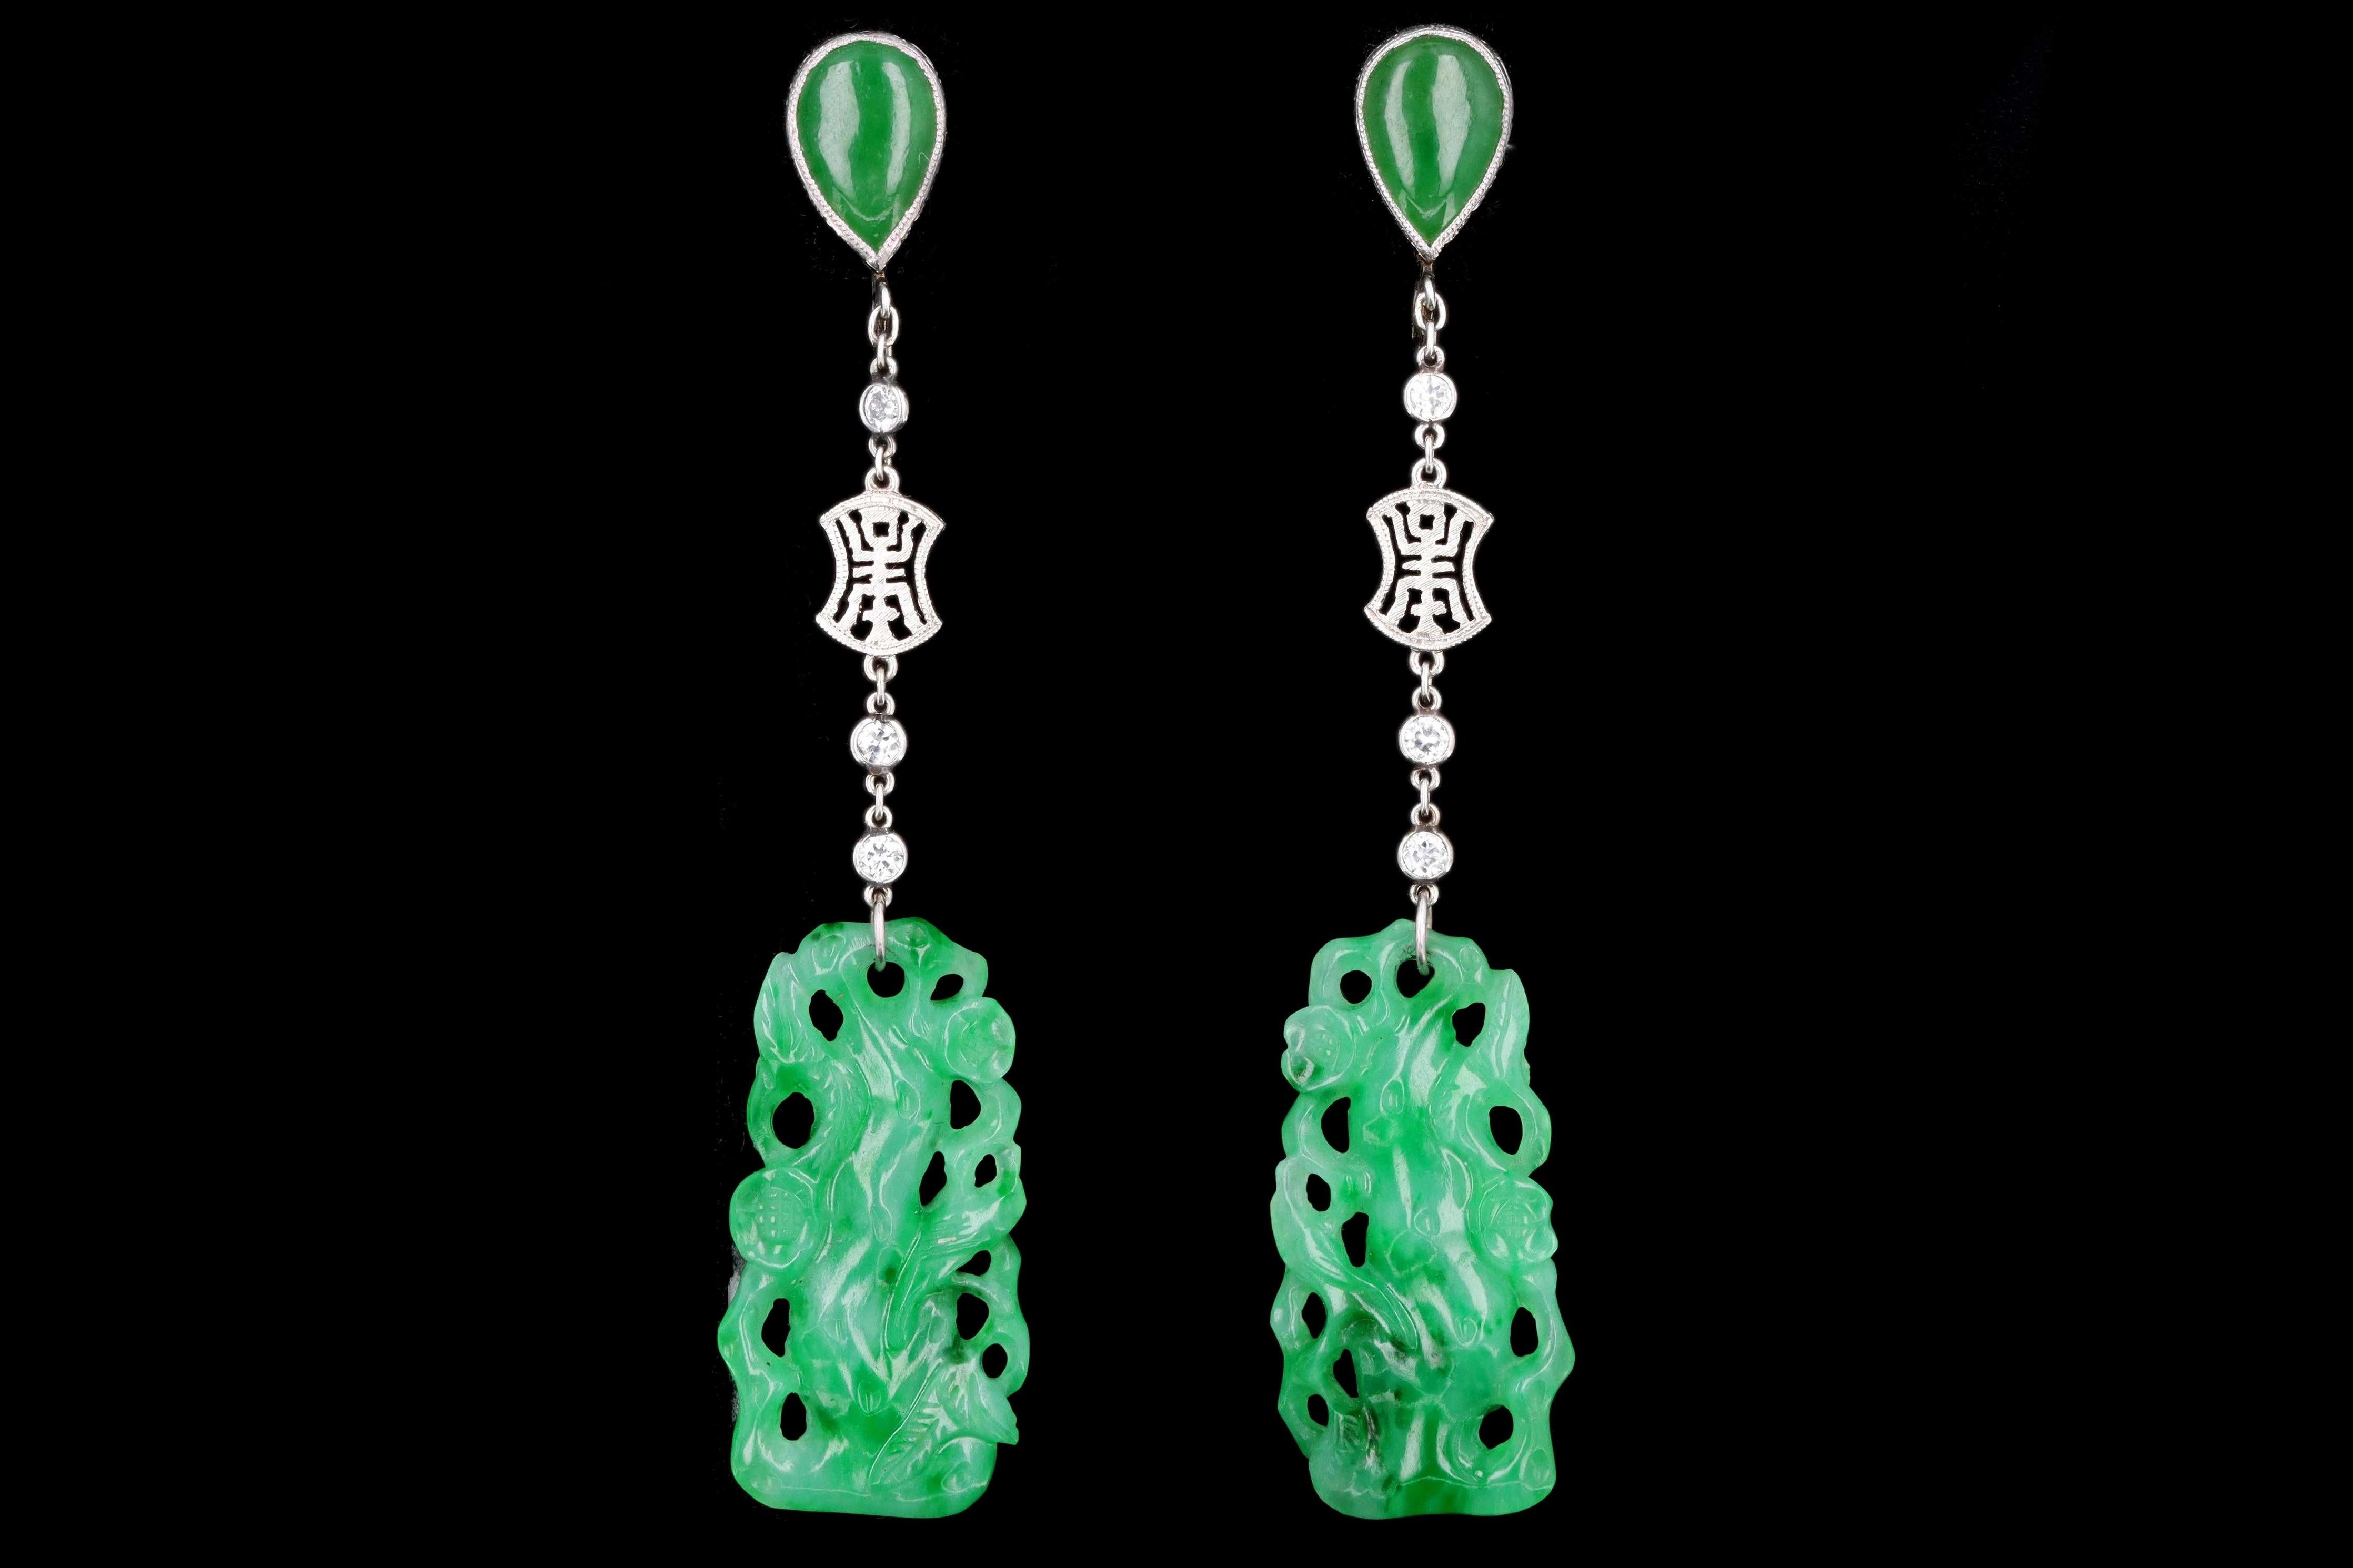 Designer: Marsh & Co.

Era: Art Deco

Composition: Platinum

Primary Stone: 2 Hand Carved Pieces Of Jadeite 

Carat Weight: Approximately 22 Carats

Secondary Stone: 2 Cabochon Pear Cut Jadeite

Carat Weight: Approximately 2.5 Carats

Accent Stone: